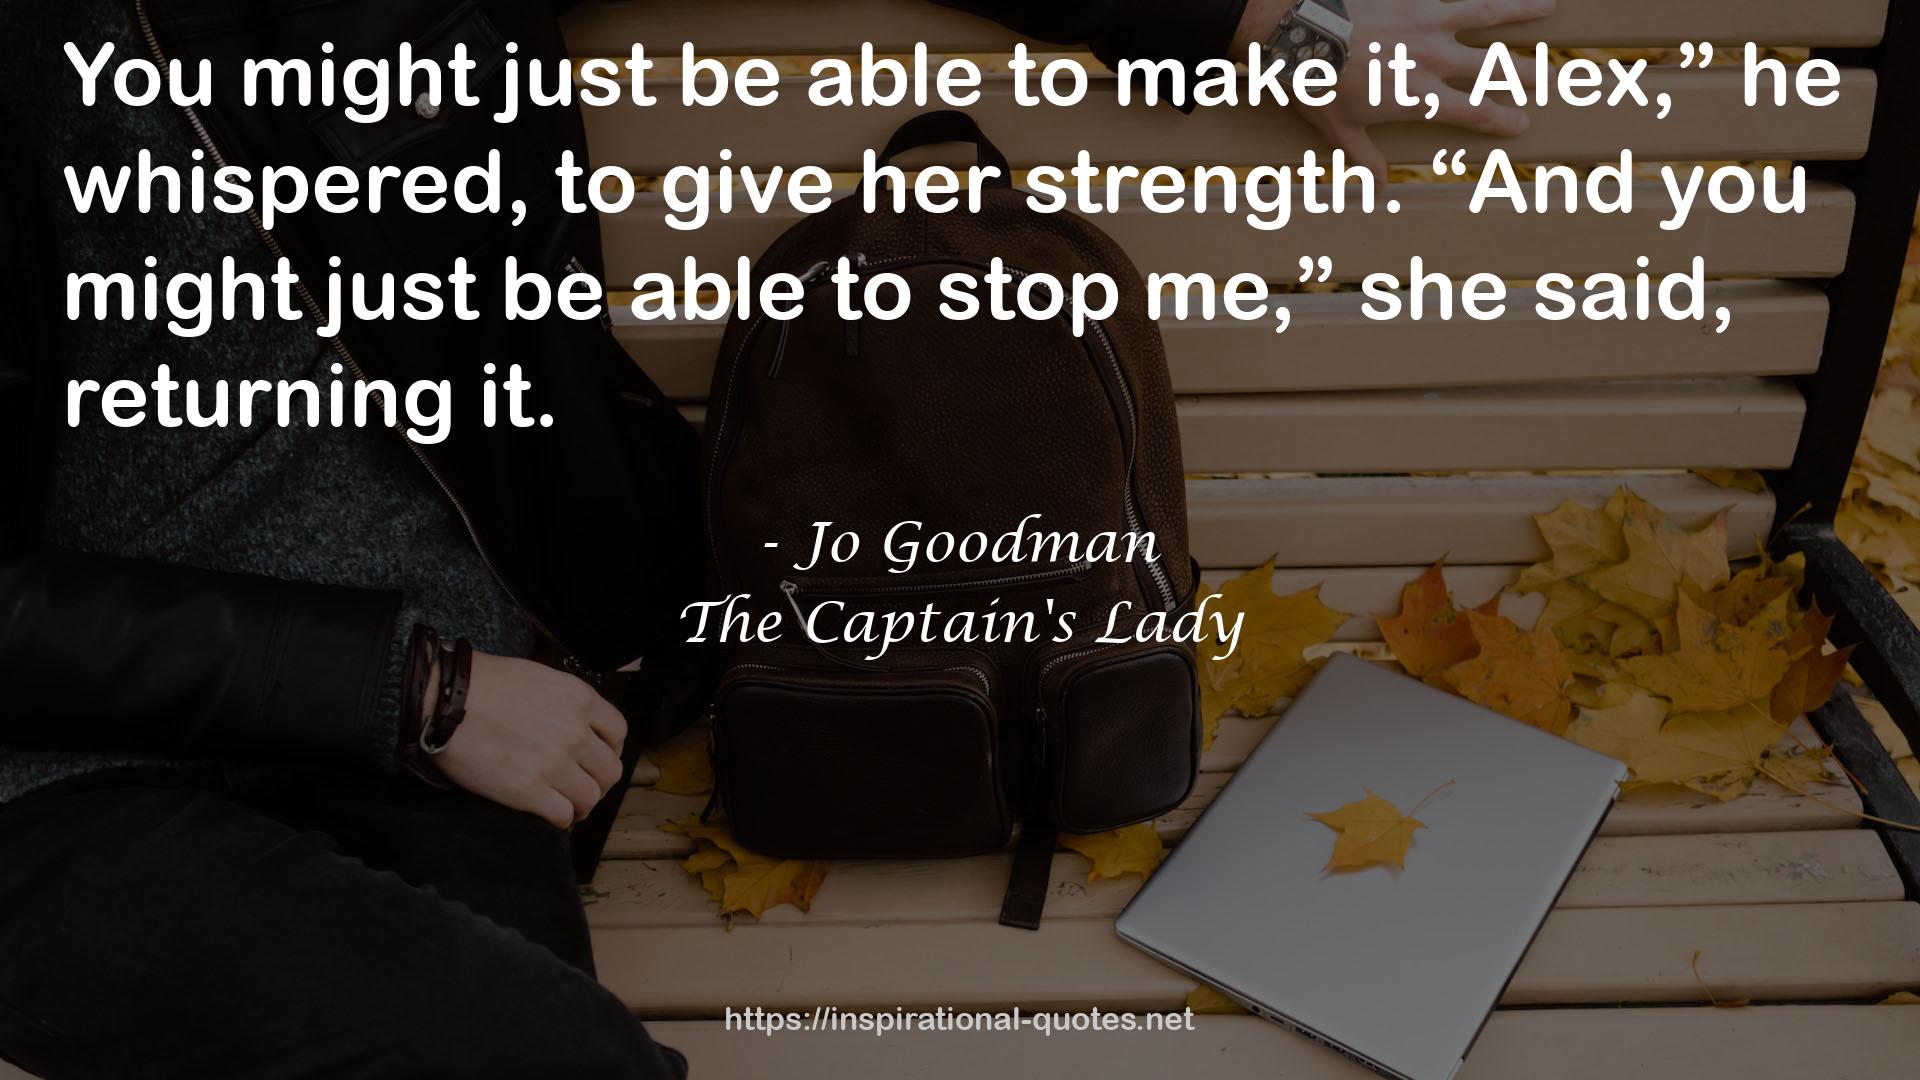 The Captain's Lady QUOTES